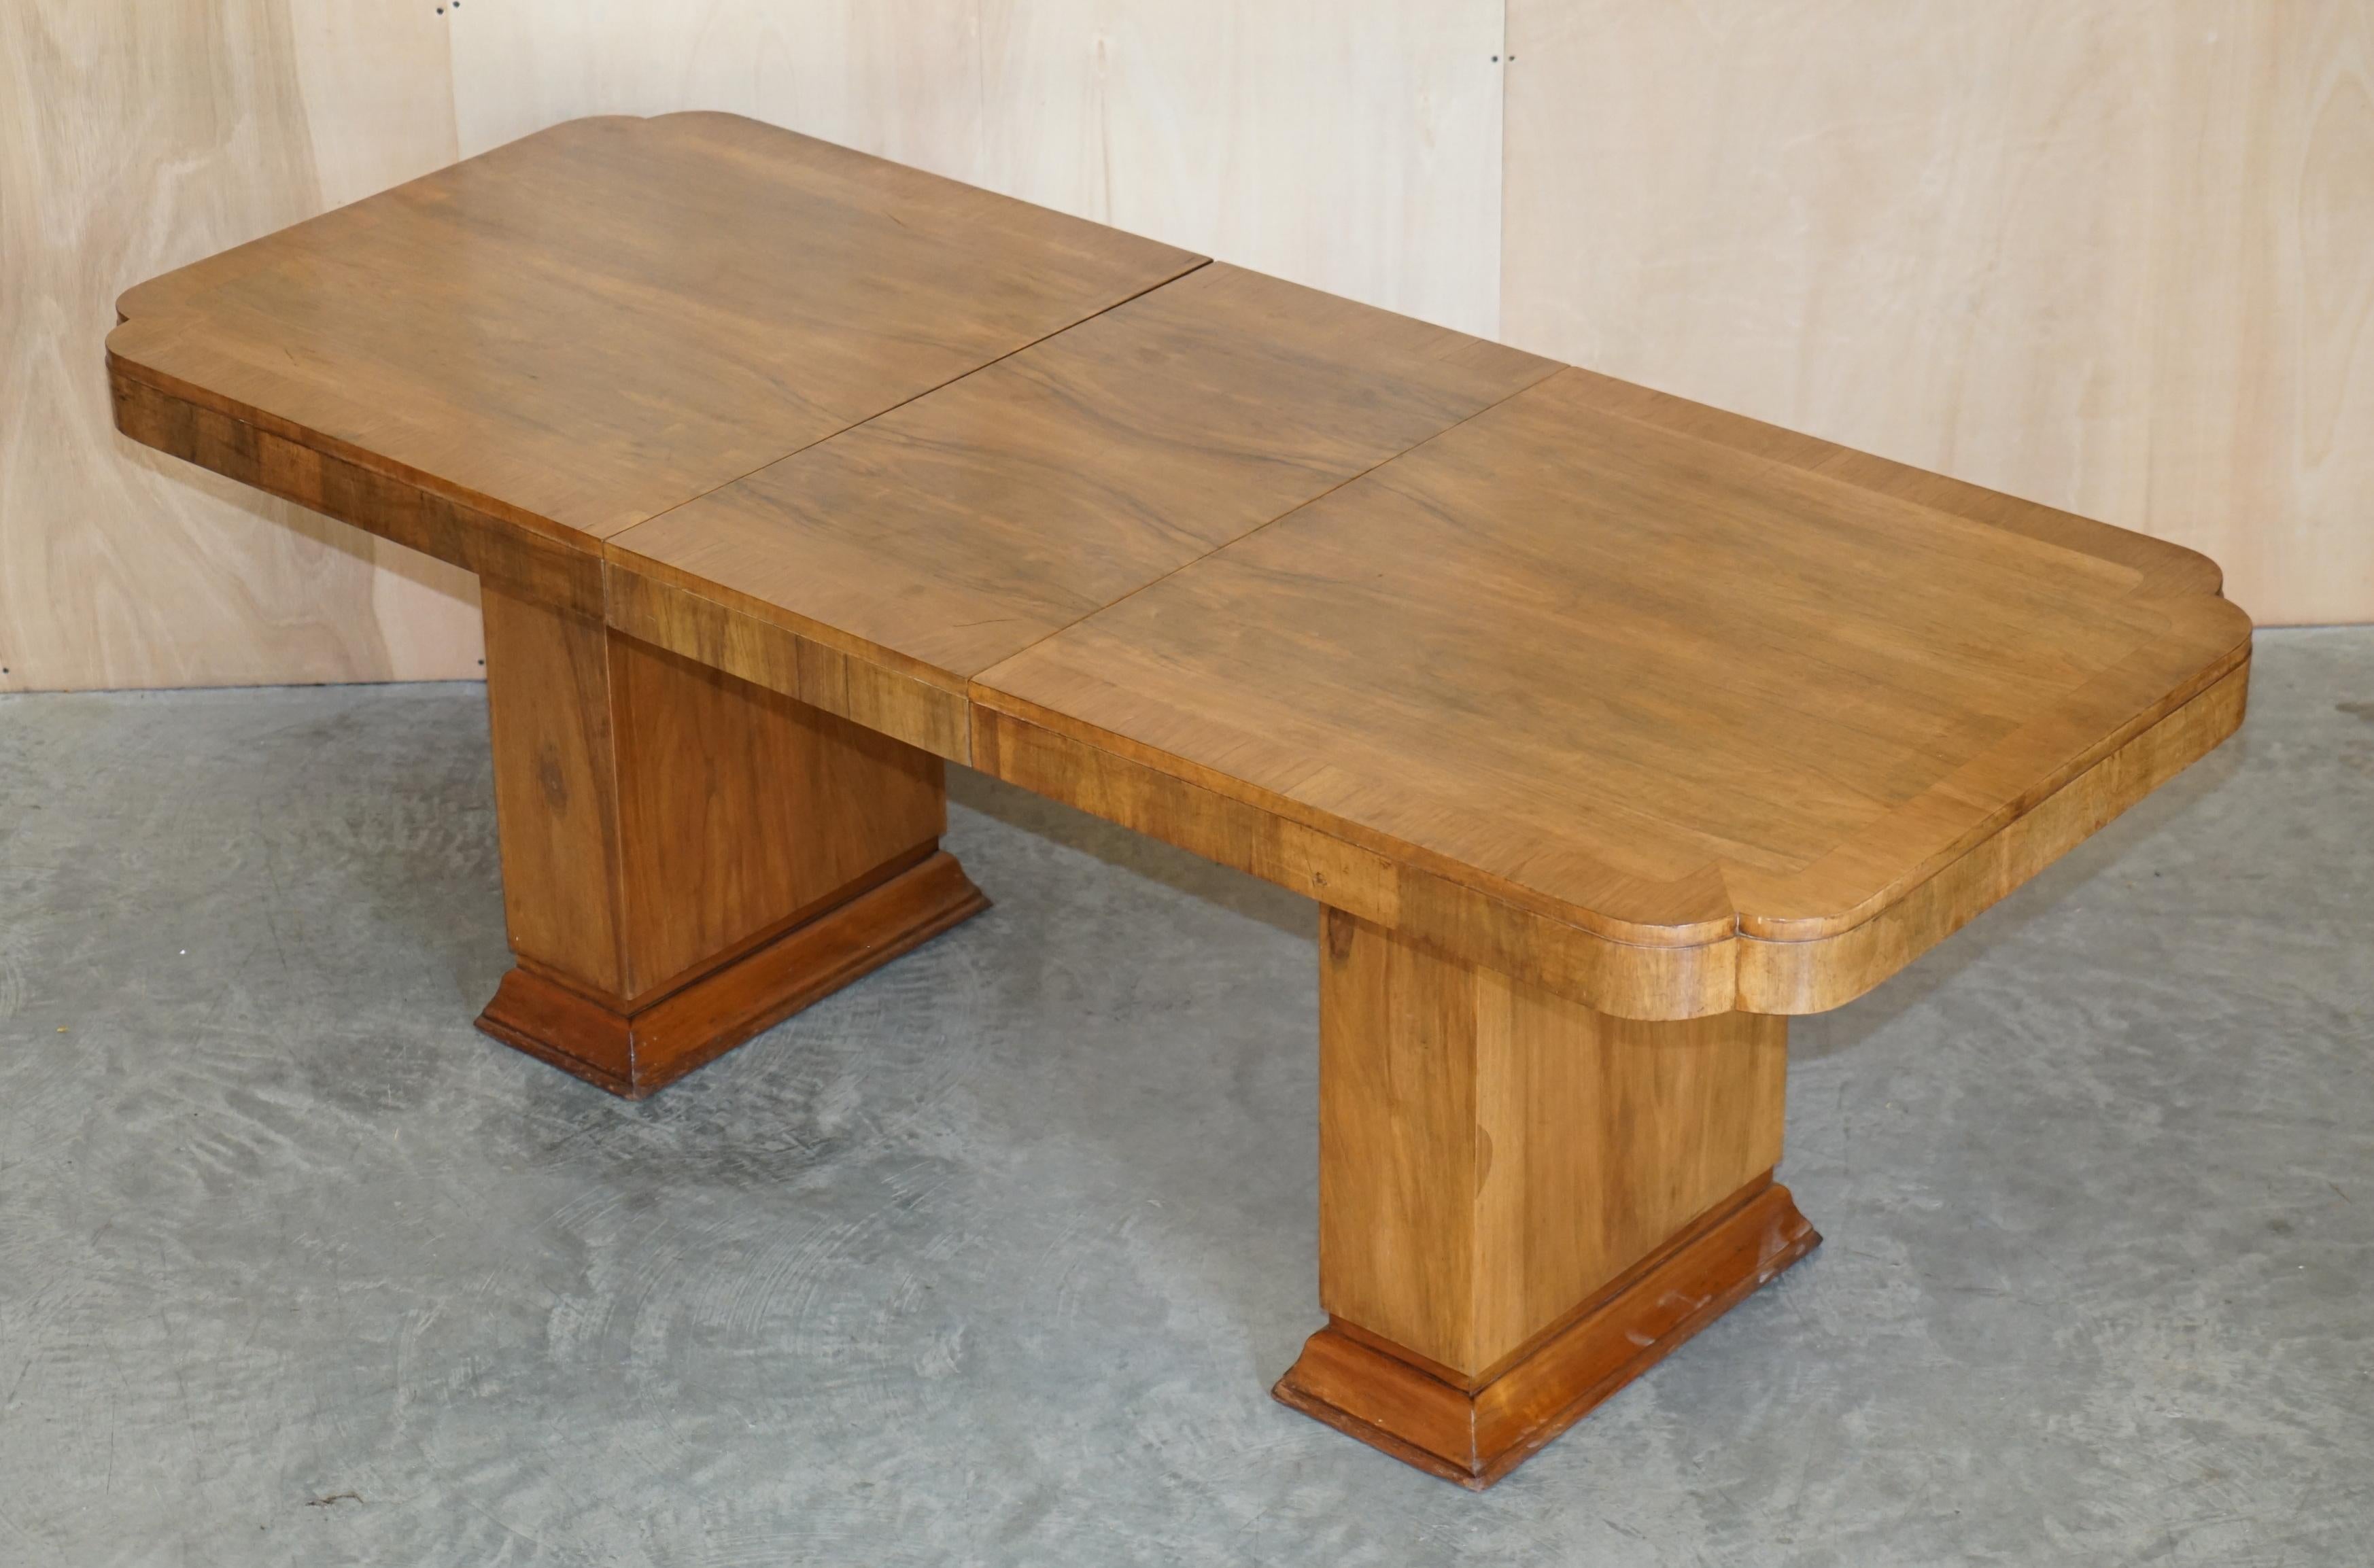 We are delighted to offer for sale this lovely circa 1920’s Art Deco walnut extending dining table.

A very good looking and expertly crafted table, it has hidden inside the frame one large extension leaf which adds another 45cm to the depth which